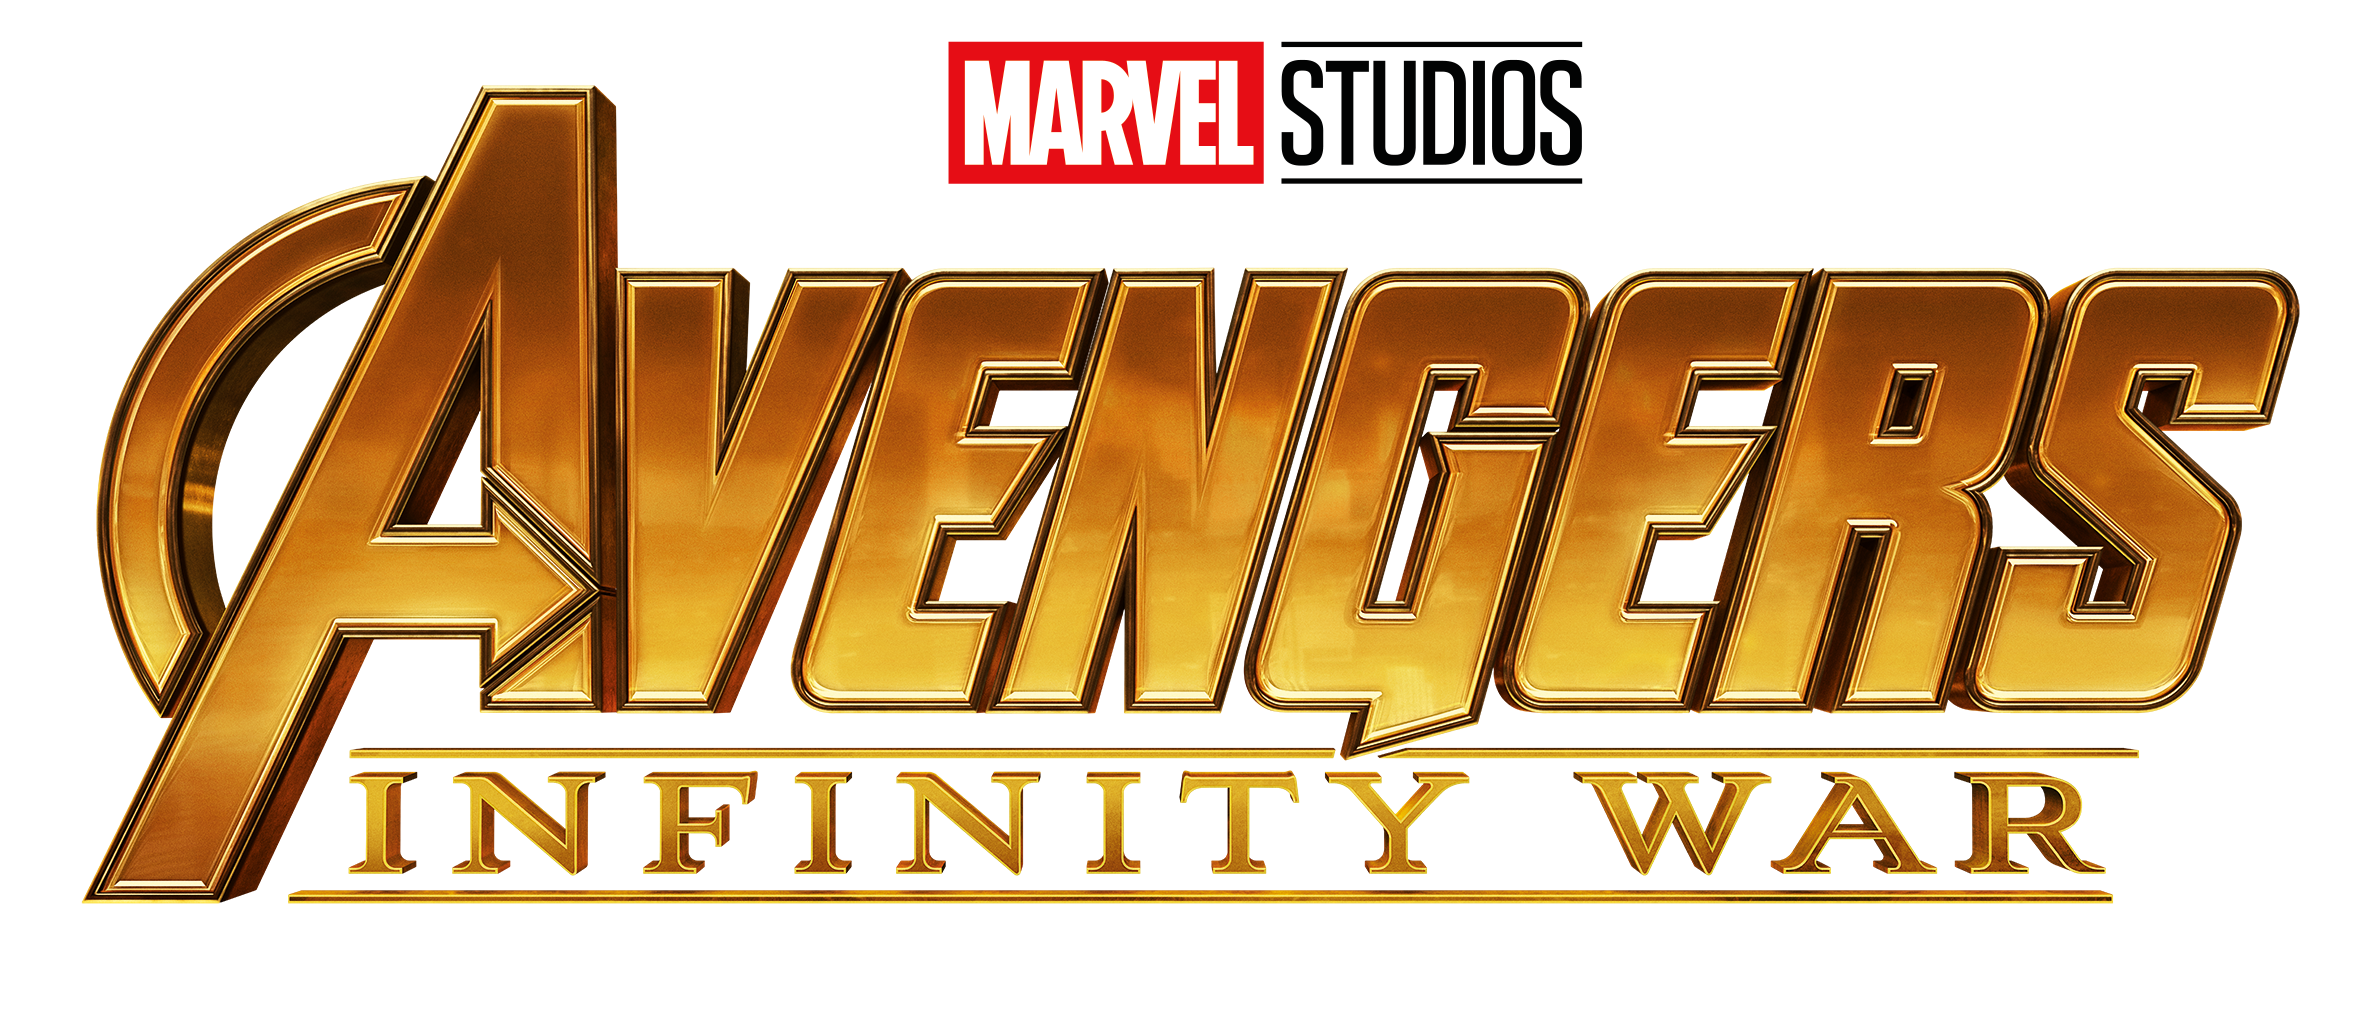 Infinity Avengers War Free Download Image PNG Image